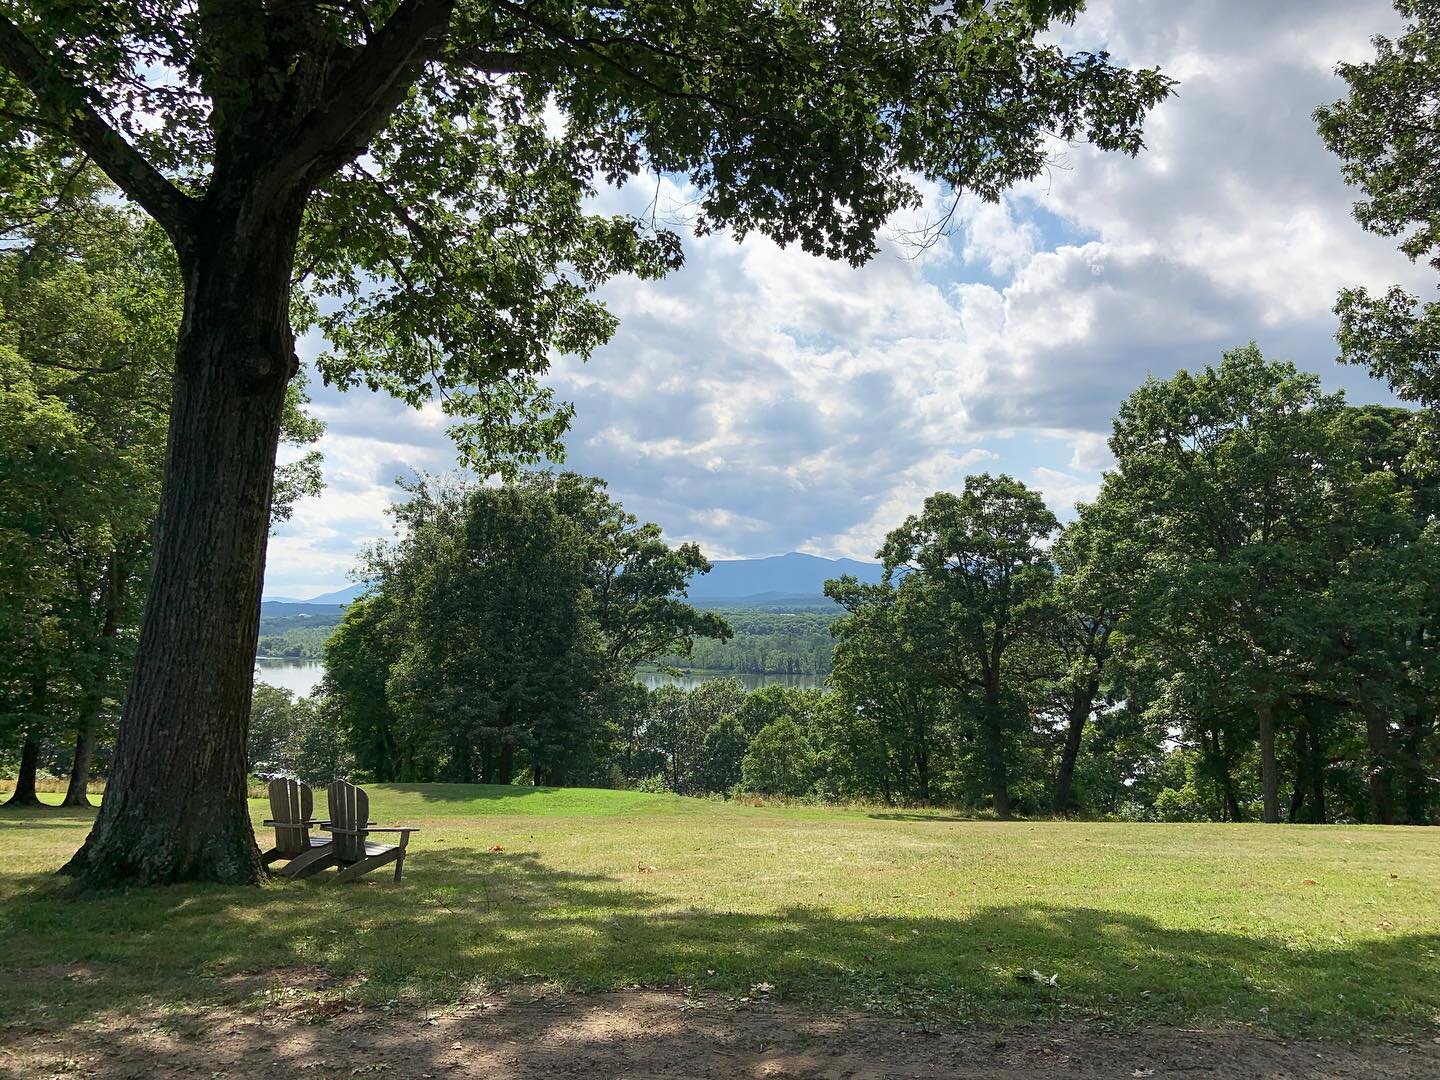 Last week we had the pleasure of working on The Oak Hill estate in Columbia County. Built in 1793, by John Livingston, it boasts beautiful views and historic architecture. The estate is still owned by the Livingston family today and operates as charm